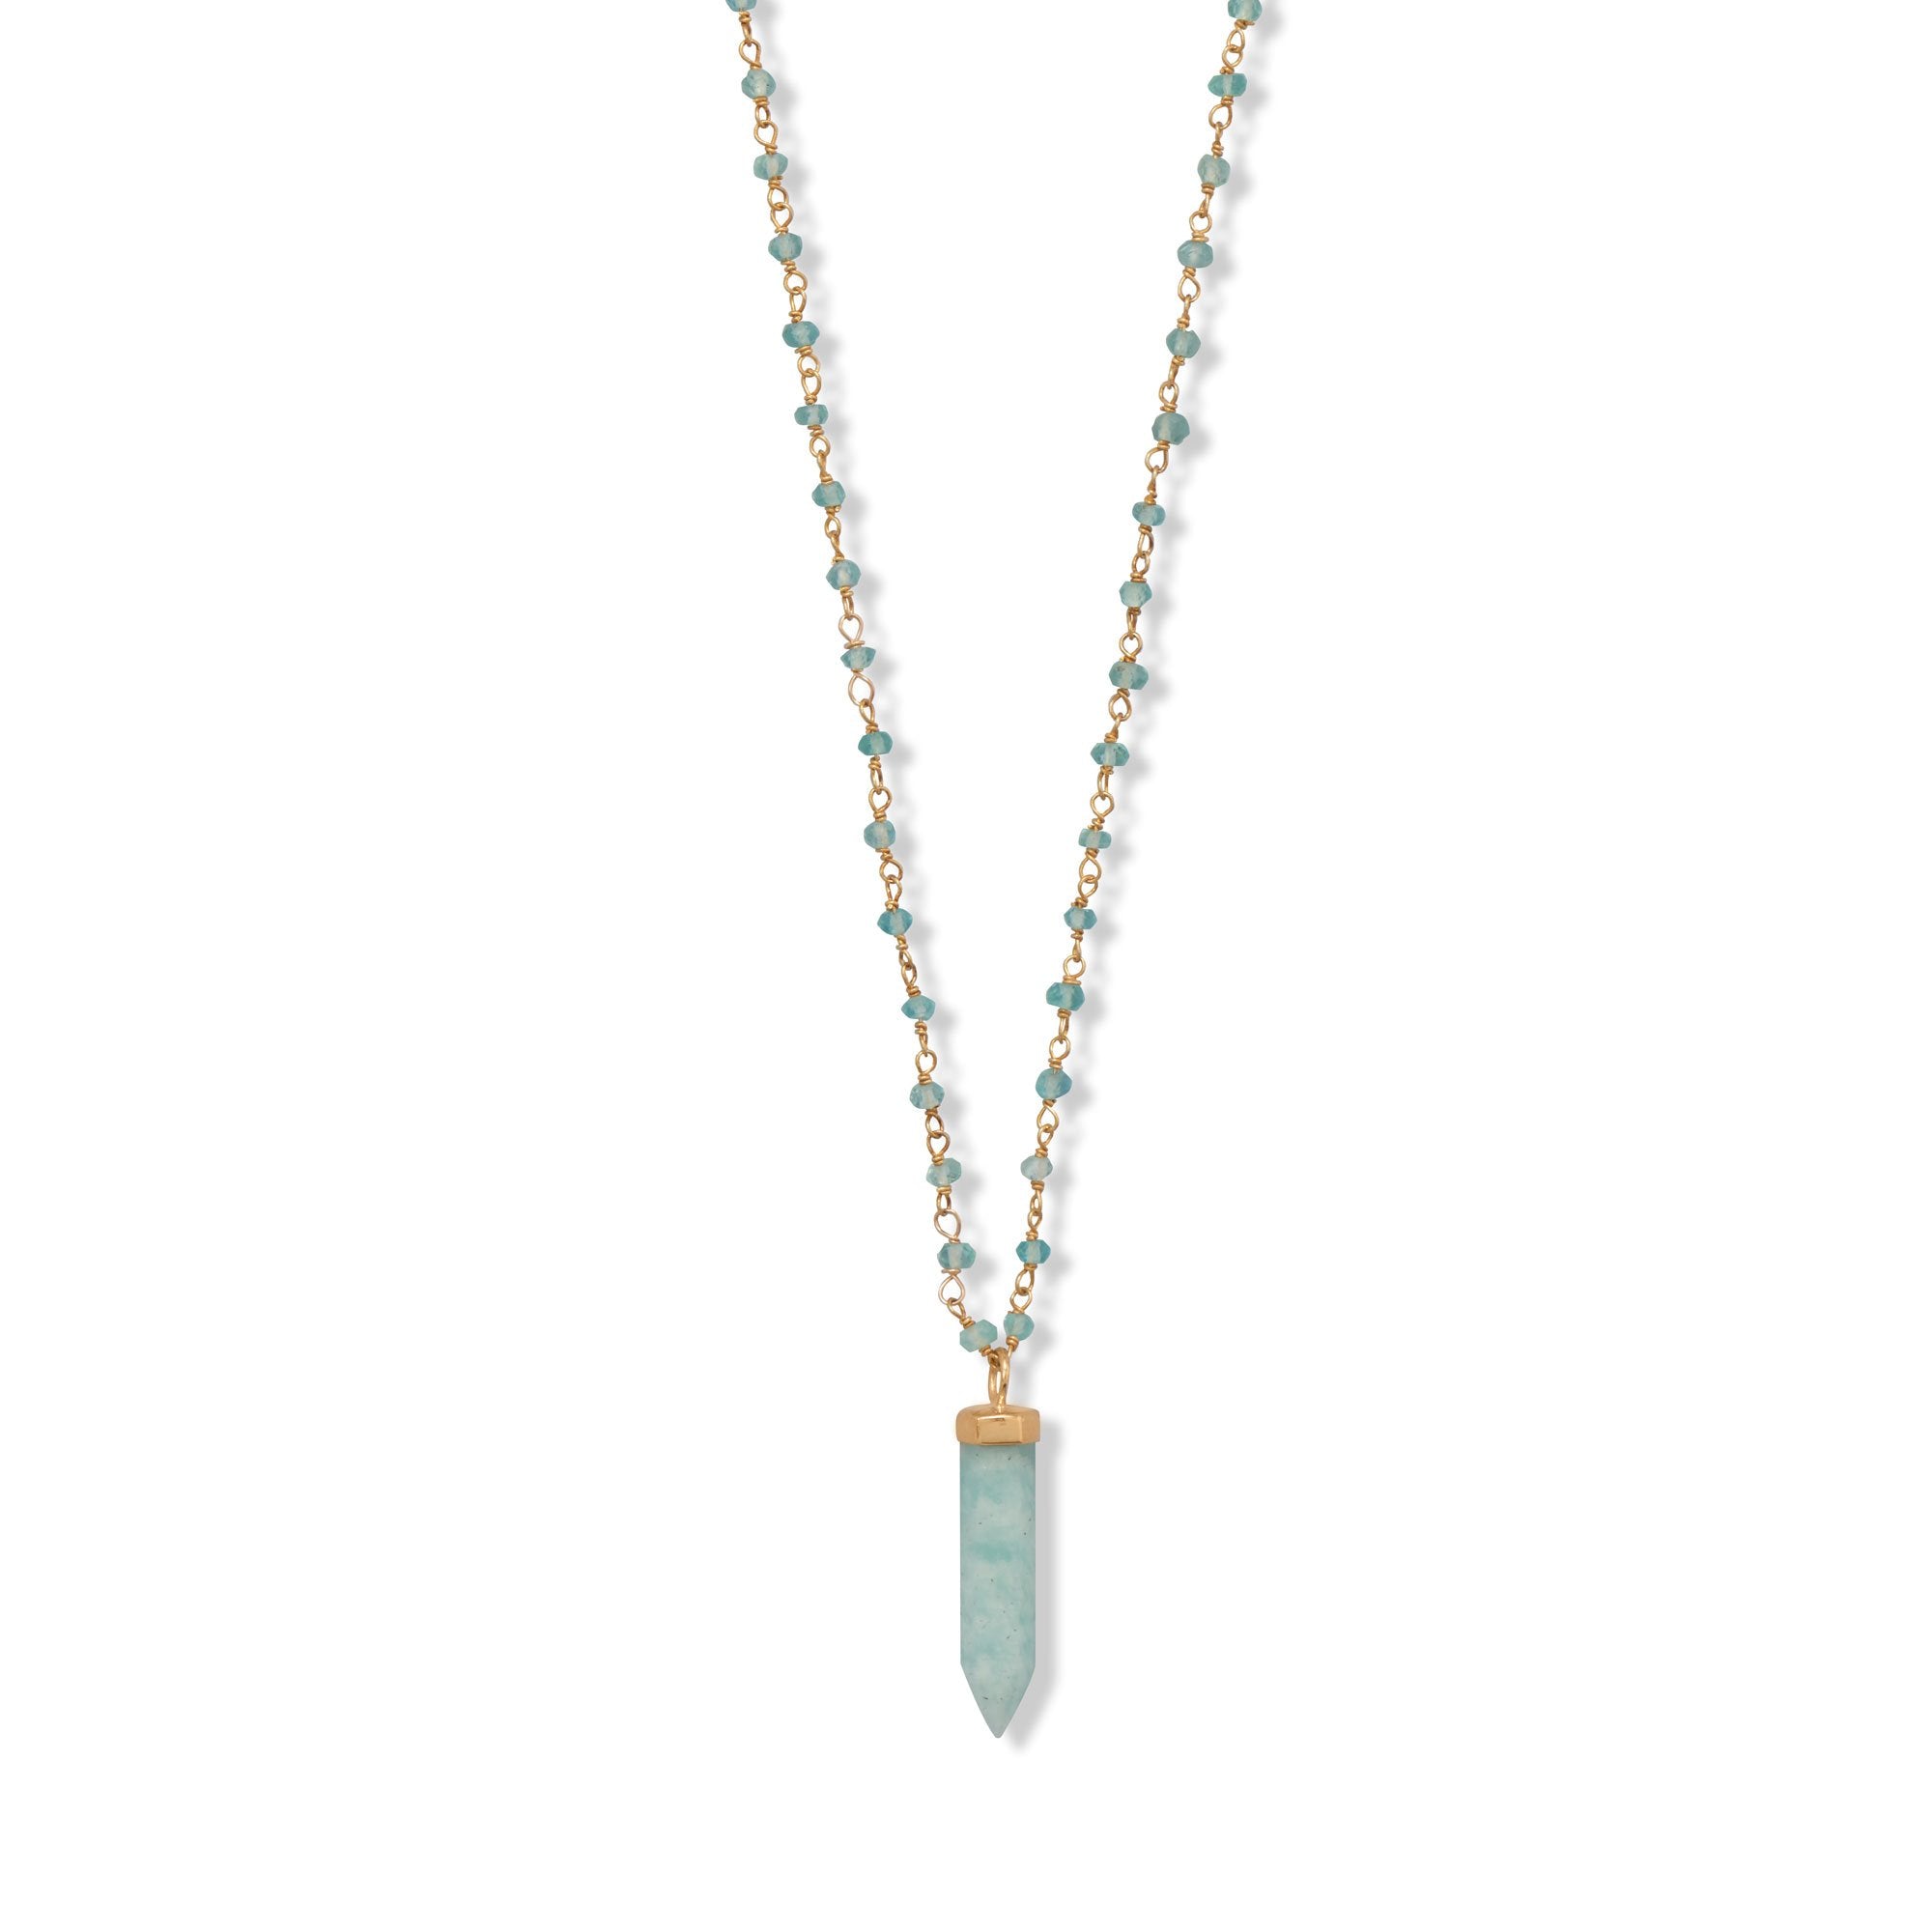 Be You Amazonite + Apatite Necklace.